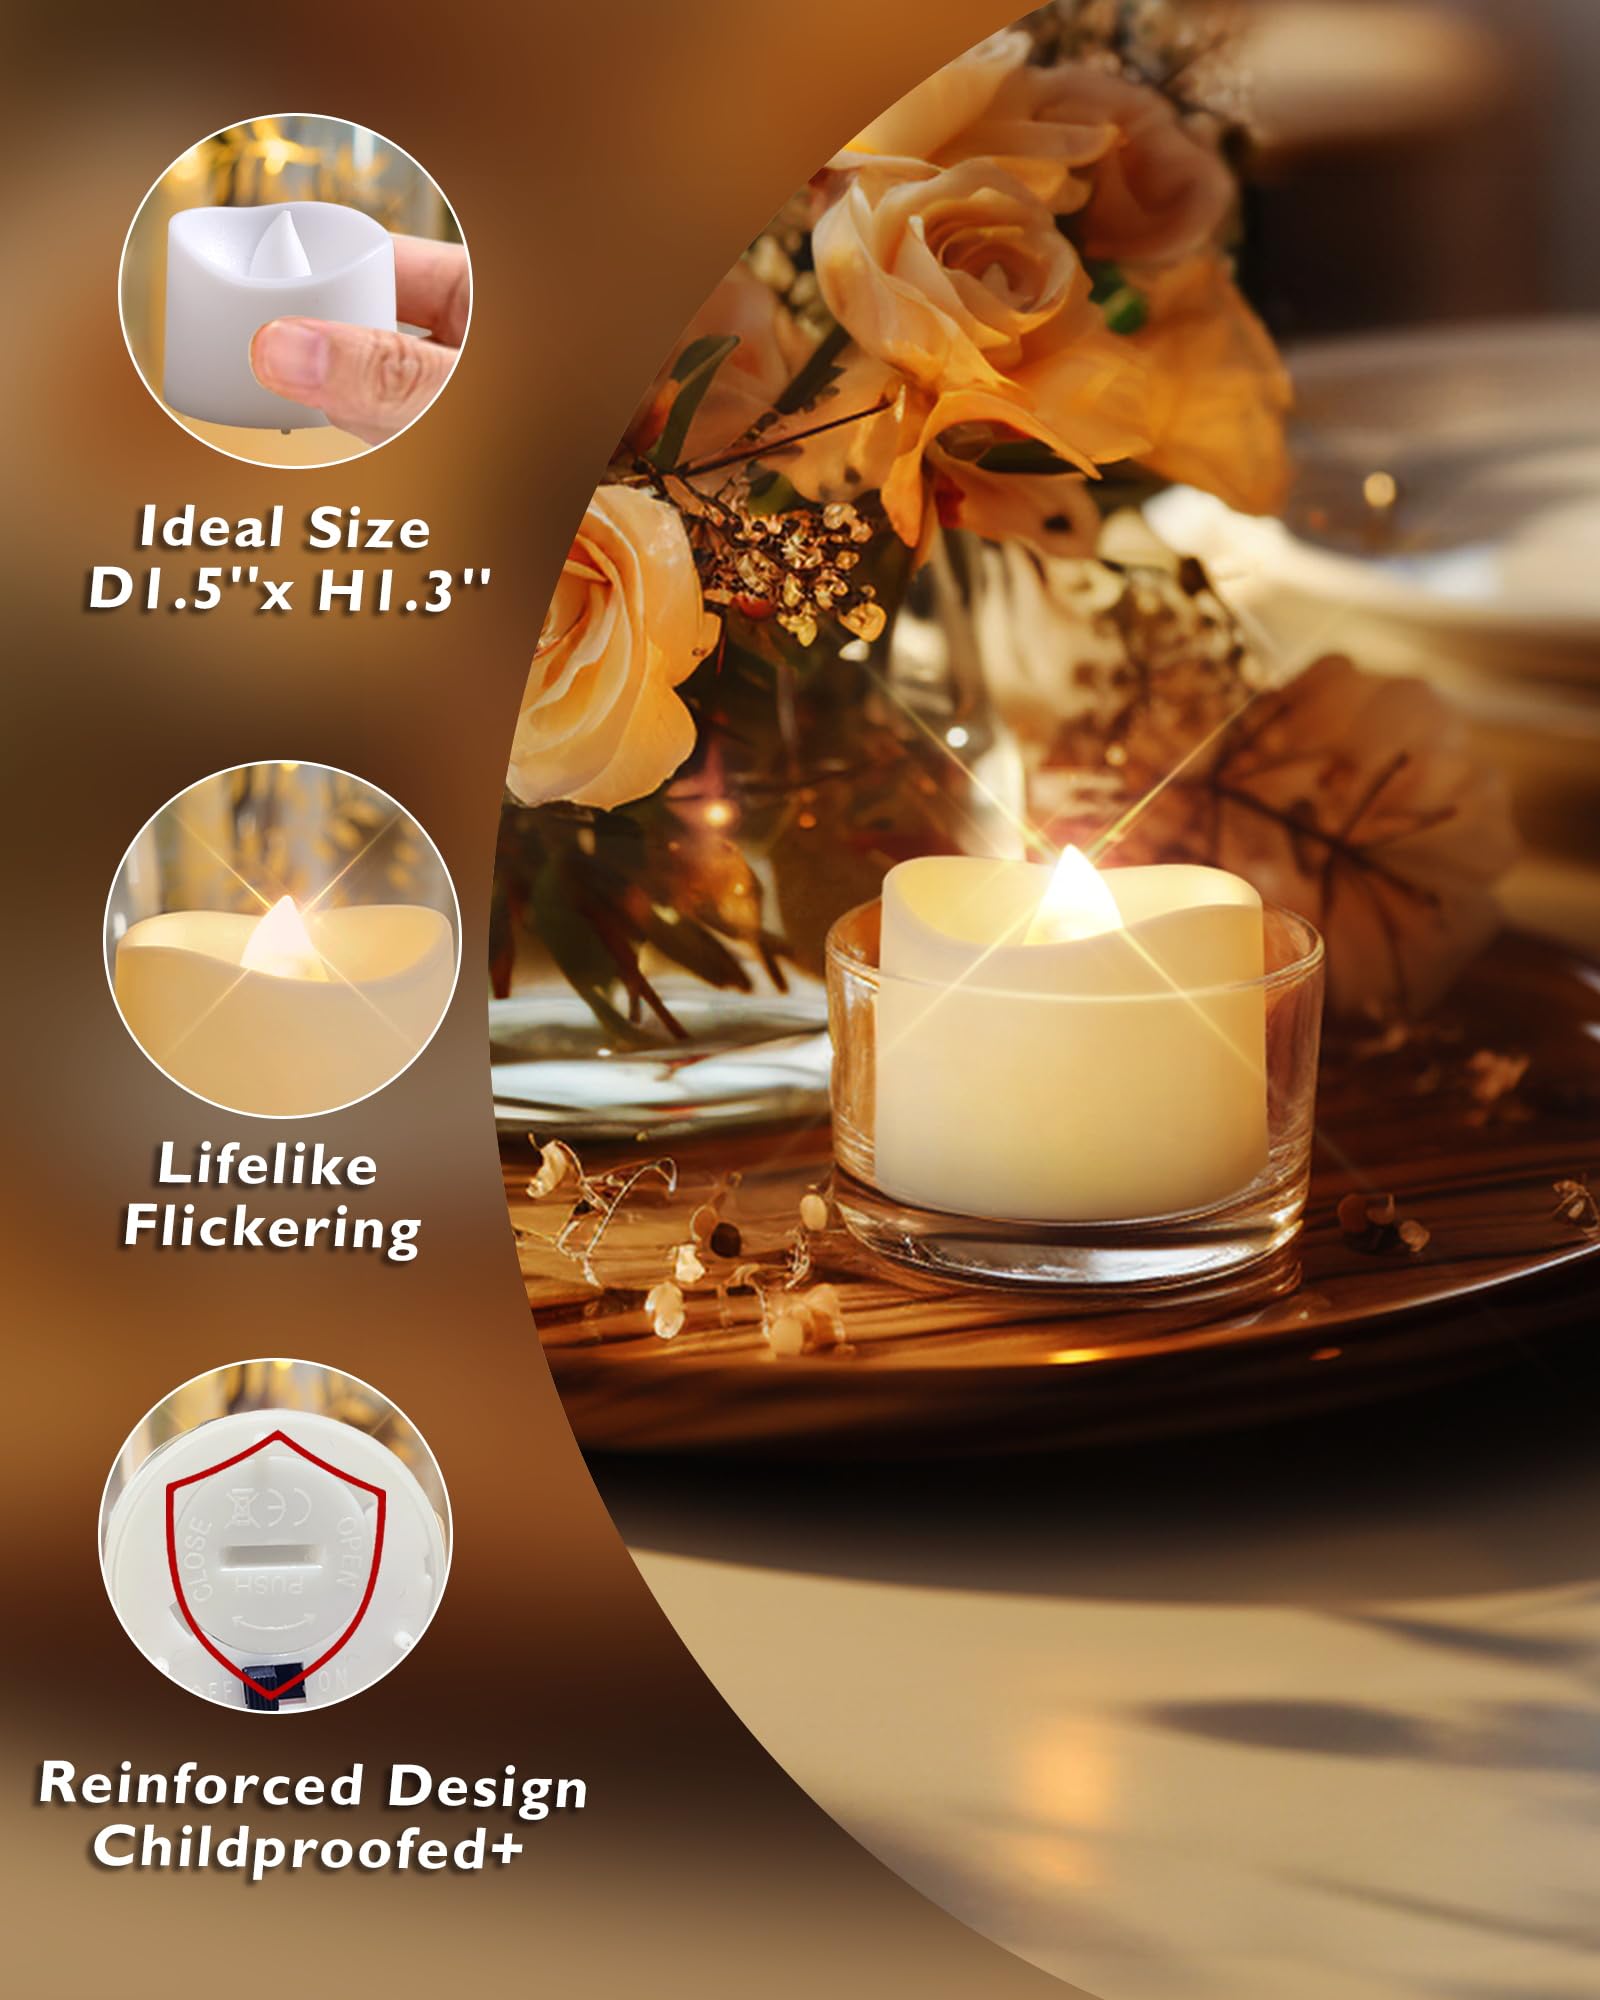 Homemory Remote Control Tea Lights, Flickering Realistic Tea Lights Battery Operated with Remote, for Home Decor and Seasonal Celebration, Pack of 12, Warm White Light, Dia 1-2/5'', H 1-1/4''